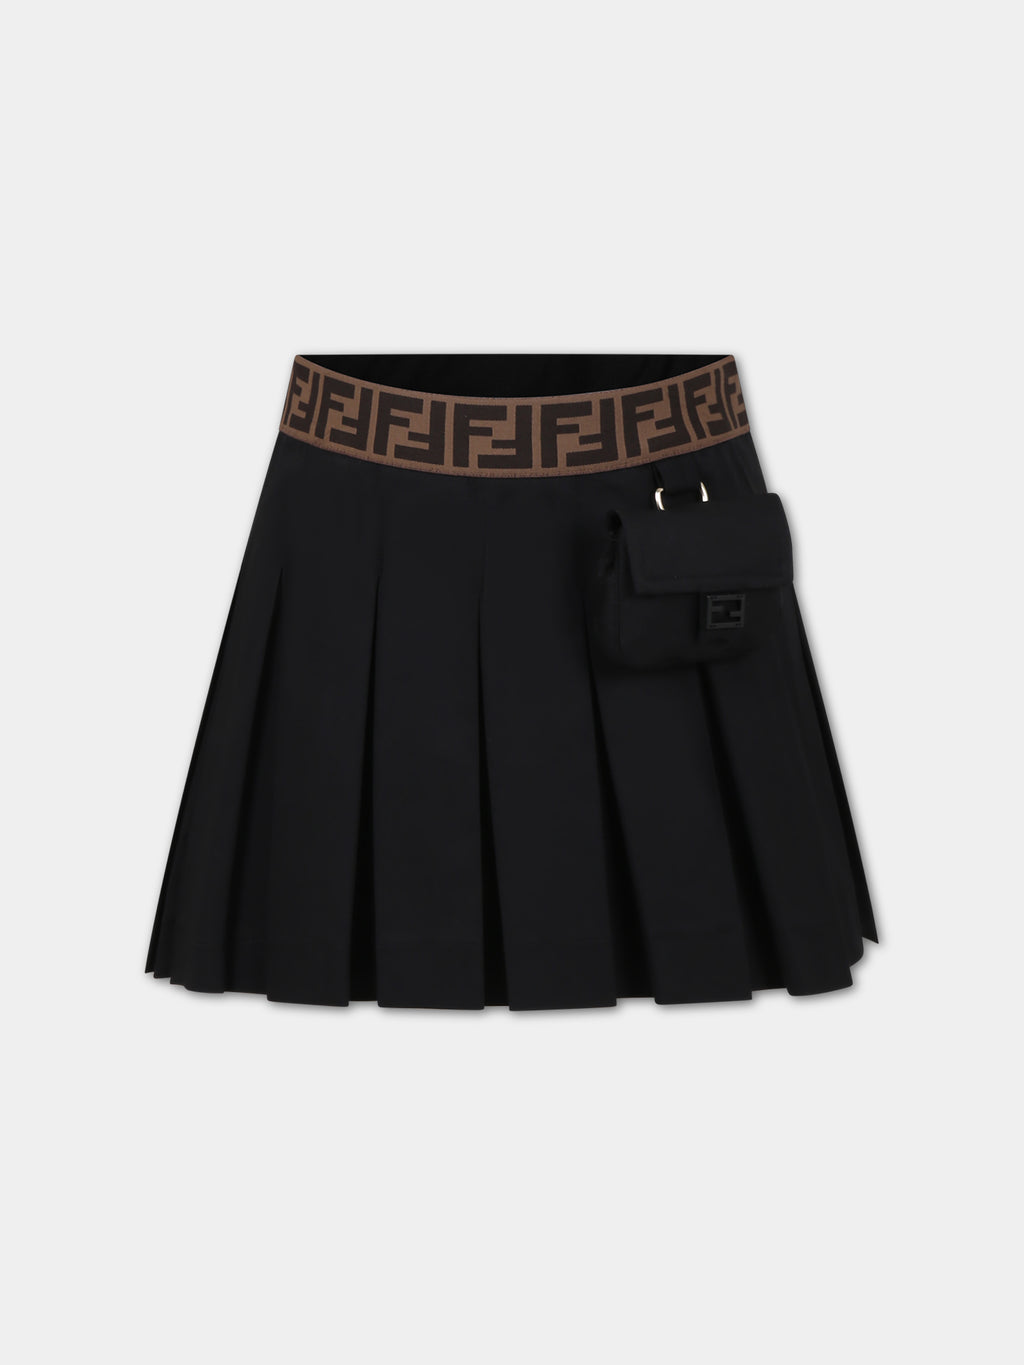 Black casual skirt for girls with baguette and FF logo